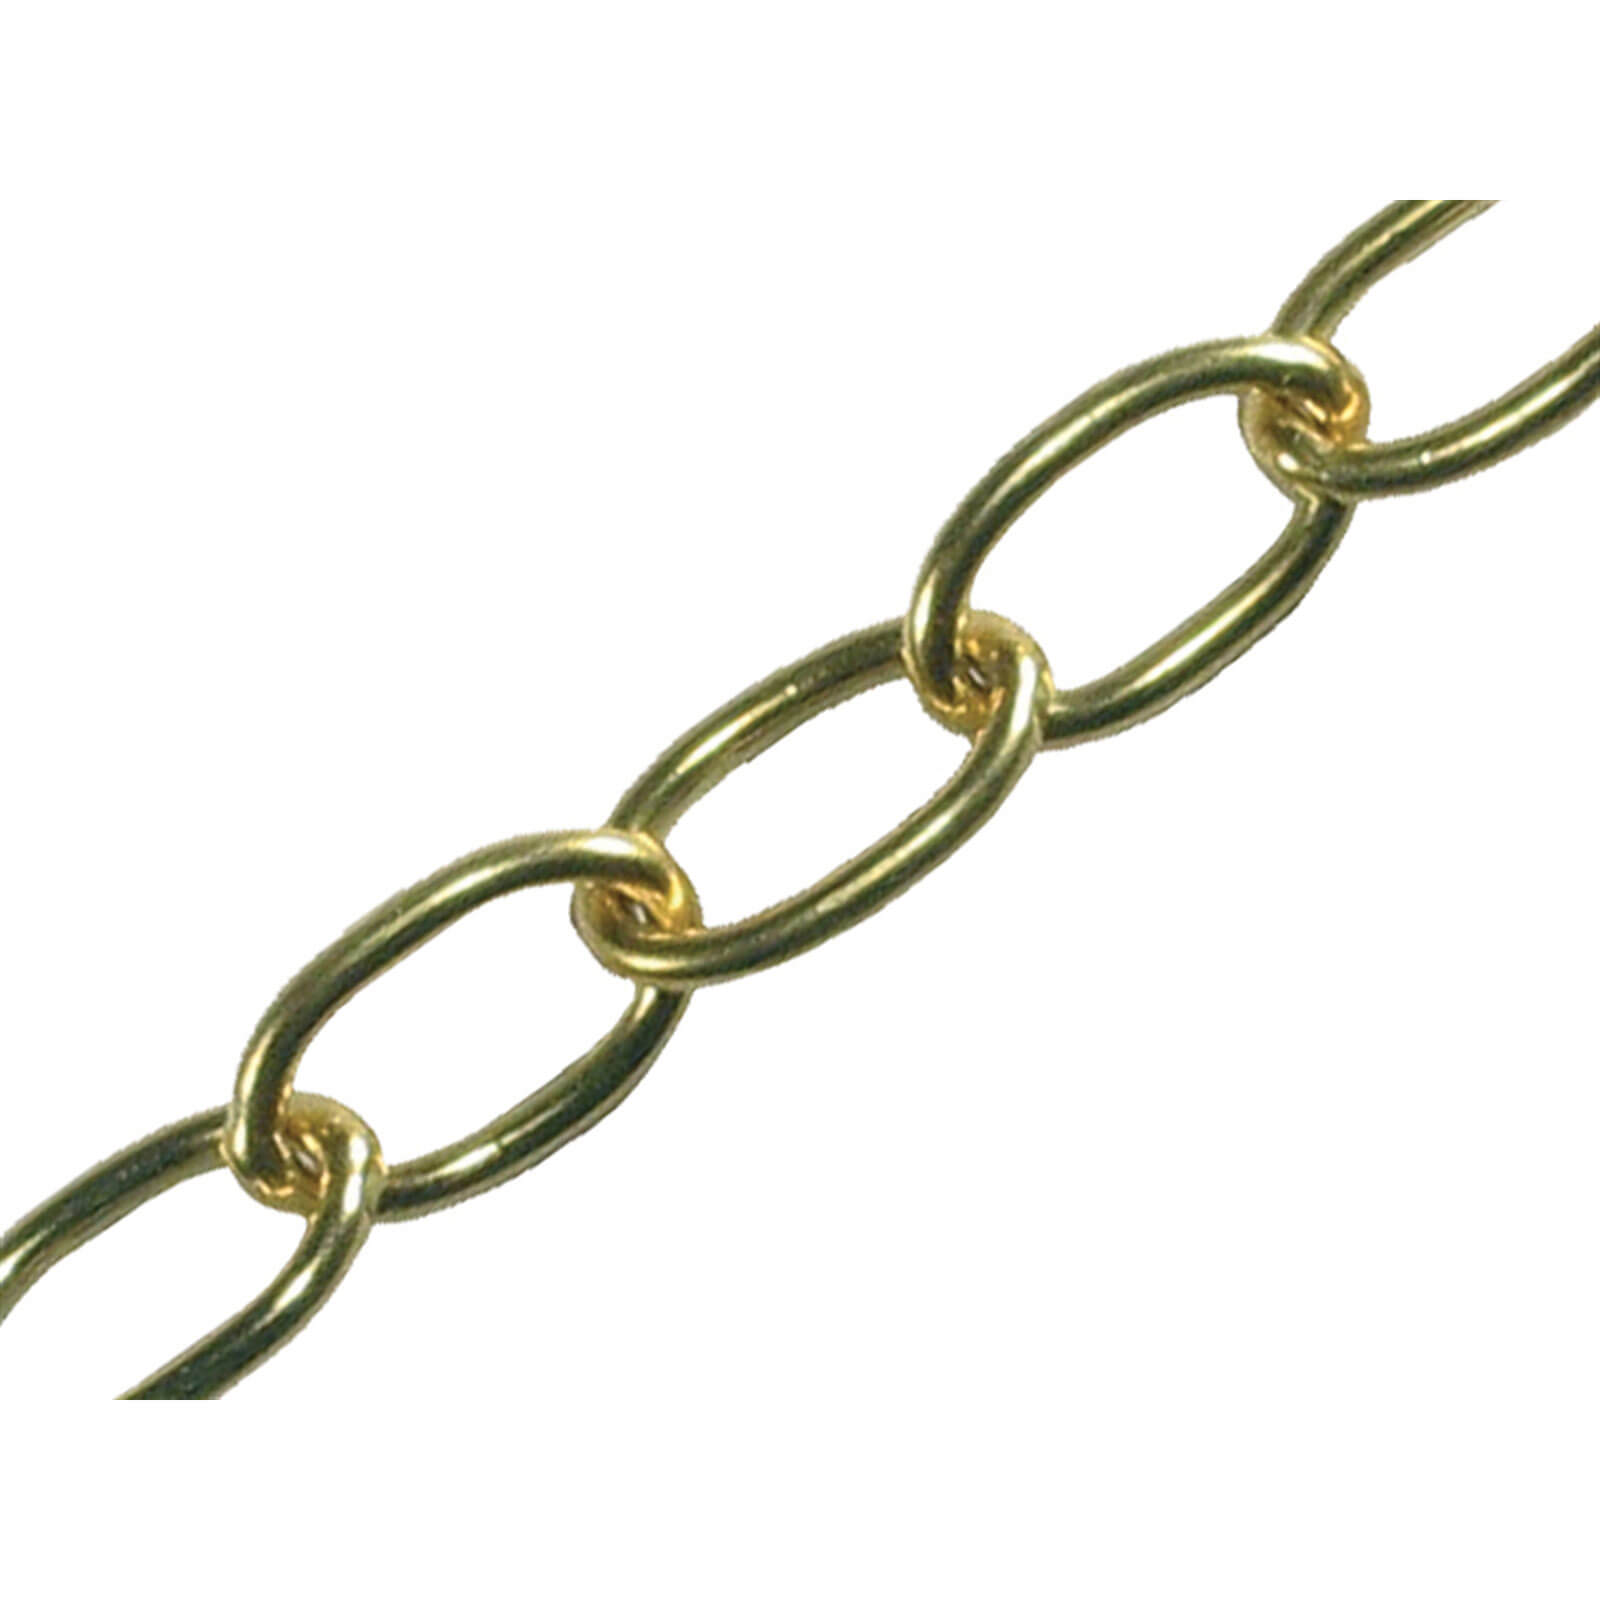 Image of Faithfull Oval Chain Polished Brass 2.3mm 10m